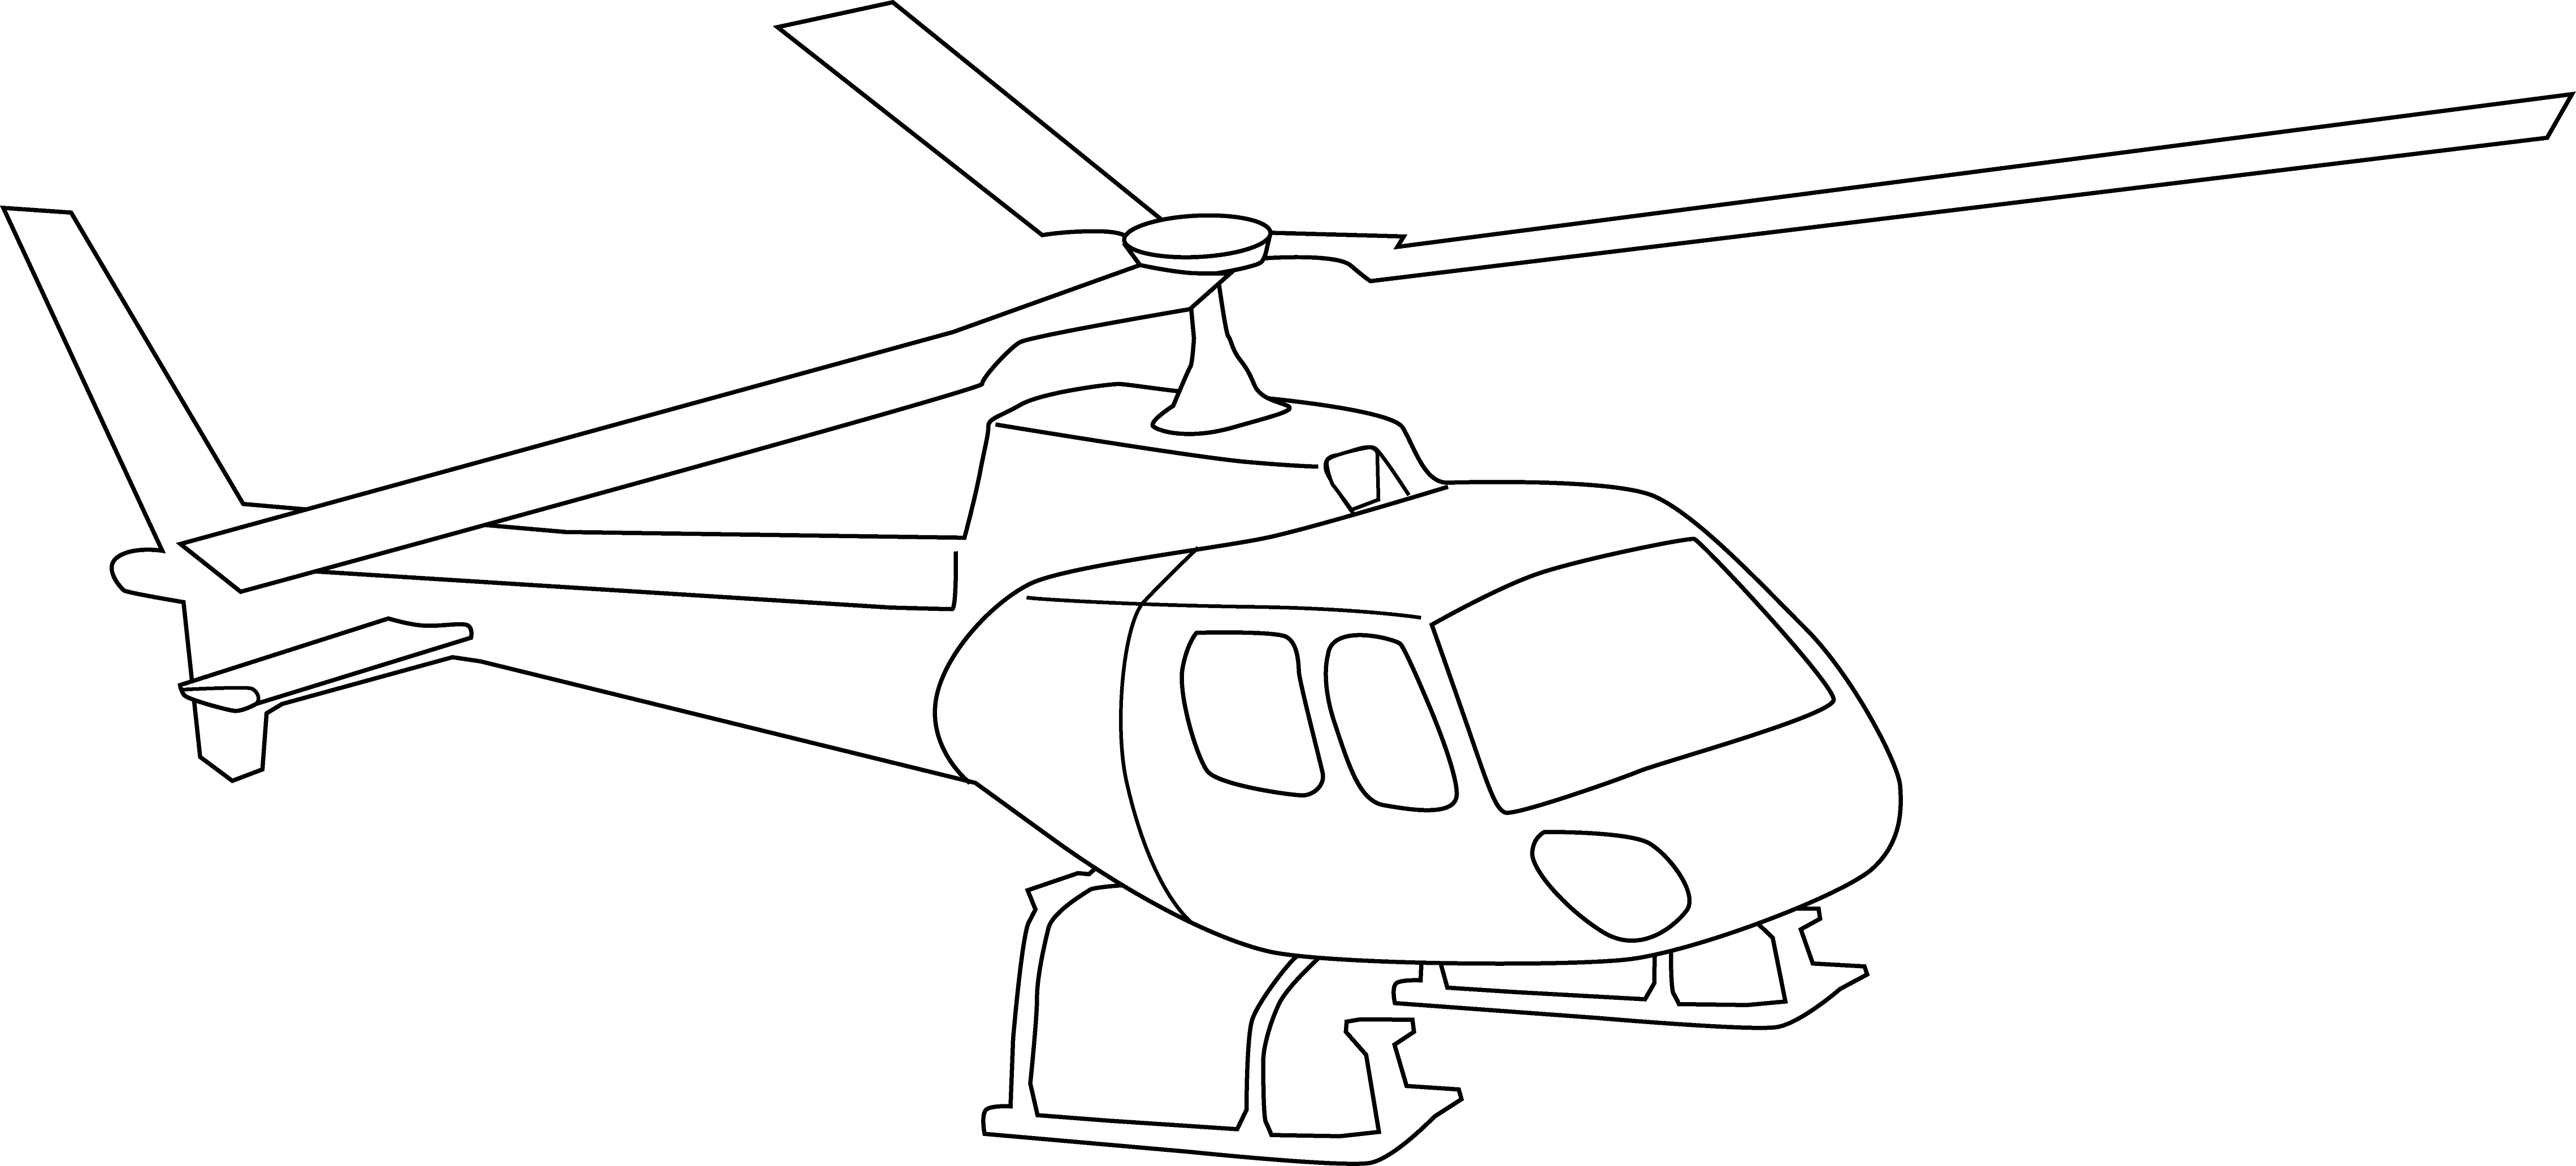 Helicopter Clipart Black And White - Gallery